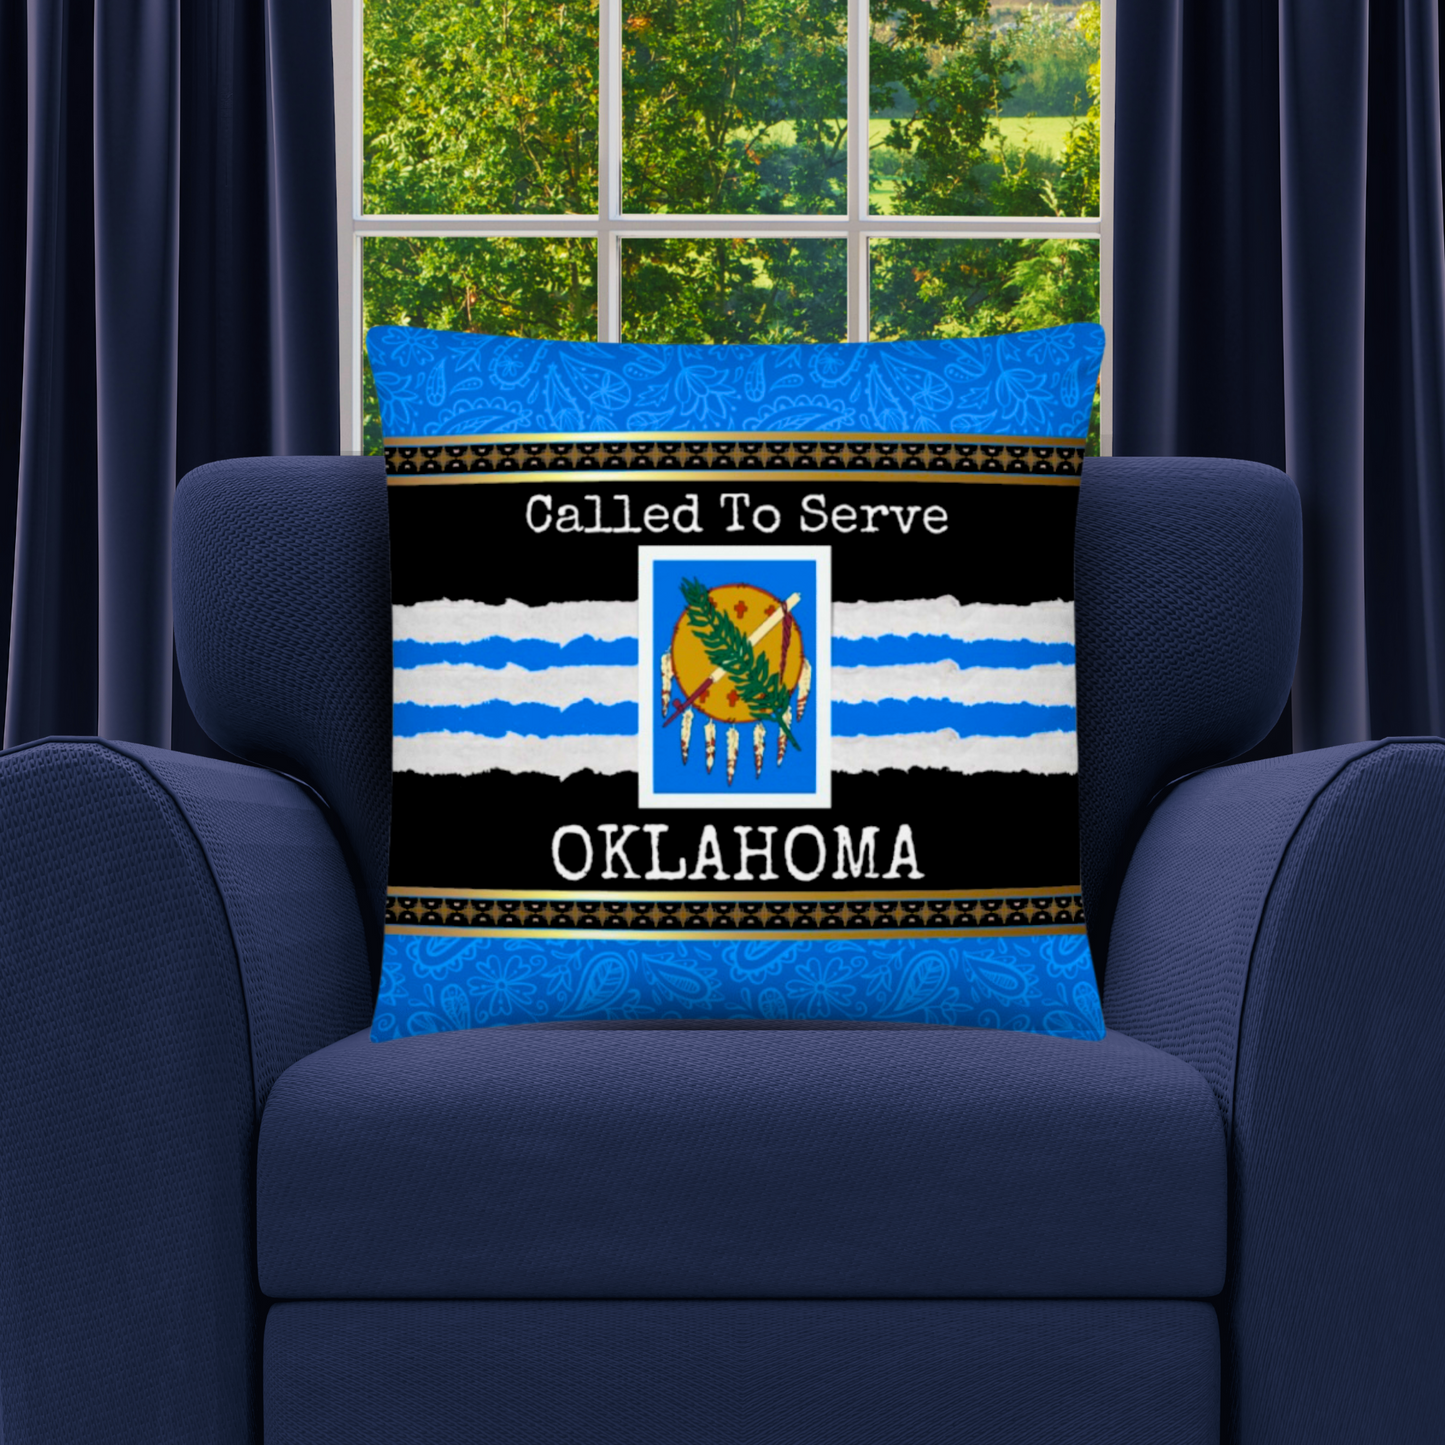 Oklahoma Missionary Gift #1 | Best Missionary Gift Ideas | Mission Call Gifts | Called to Serve Gifts | Missionary Mom Gifts | Best Latter Day Saint Gifts | LDS Missionary Gifts | Oklahoma Home Decor